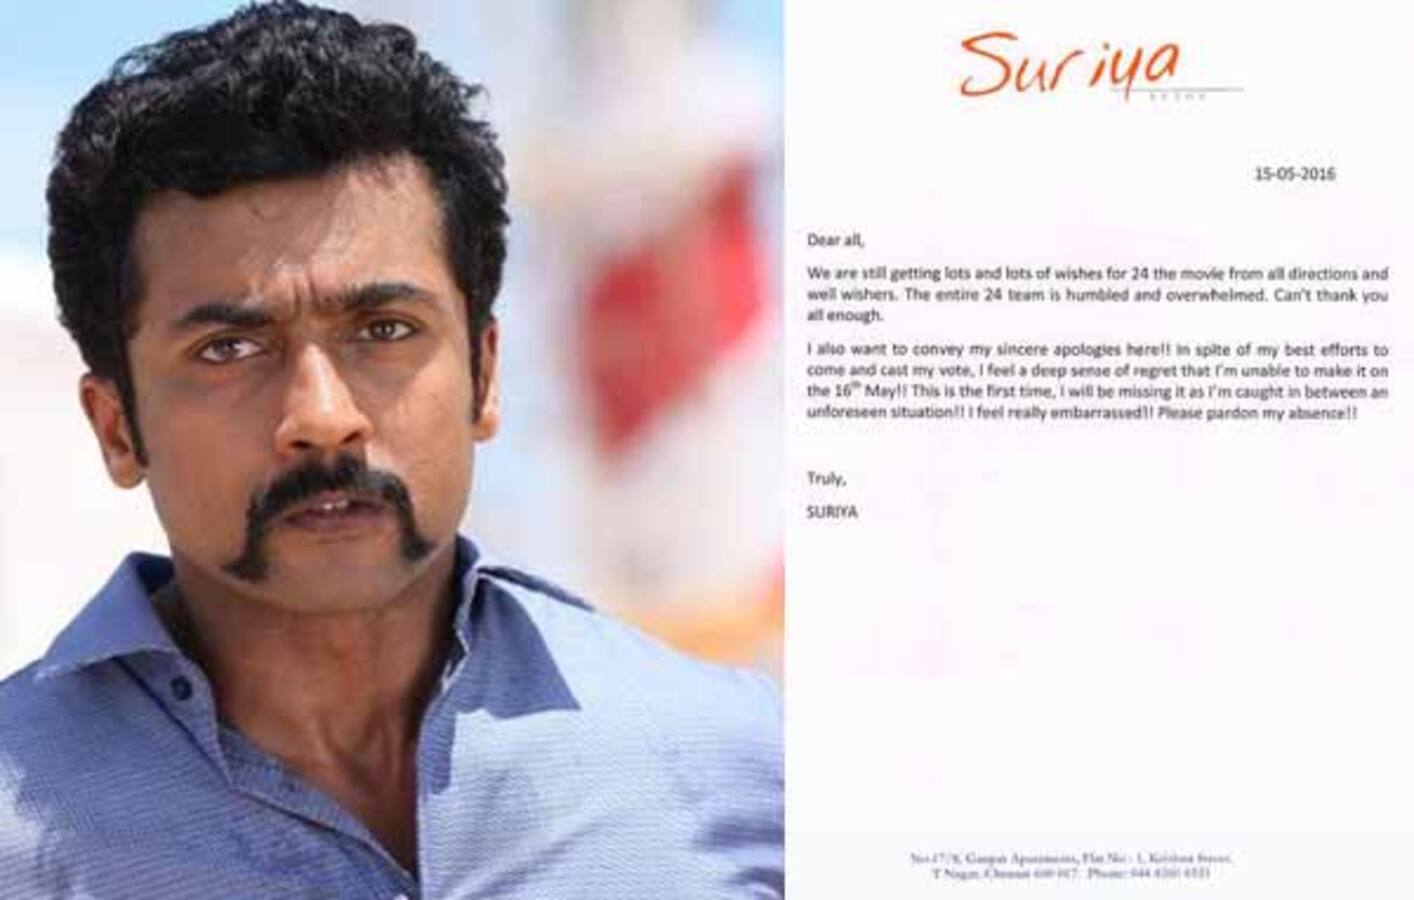 Suriya apologises to his fans for not casting his vote at Tamil Nadu state elections